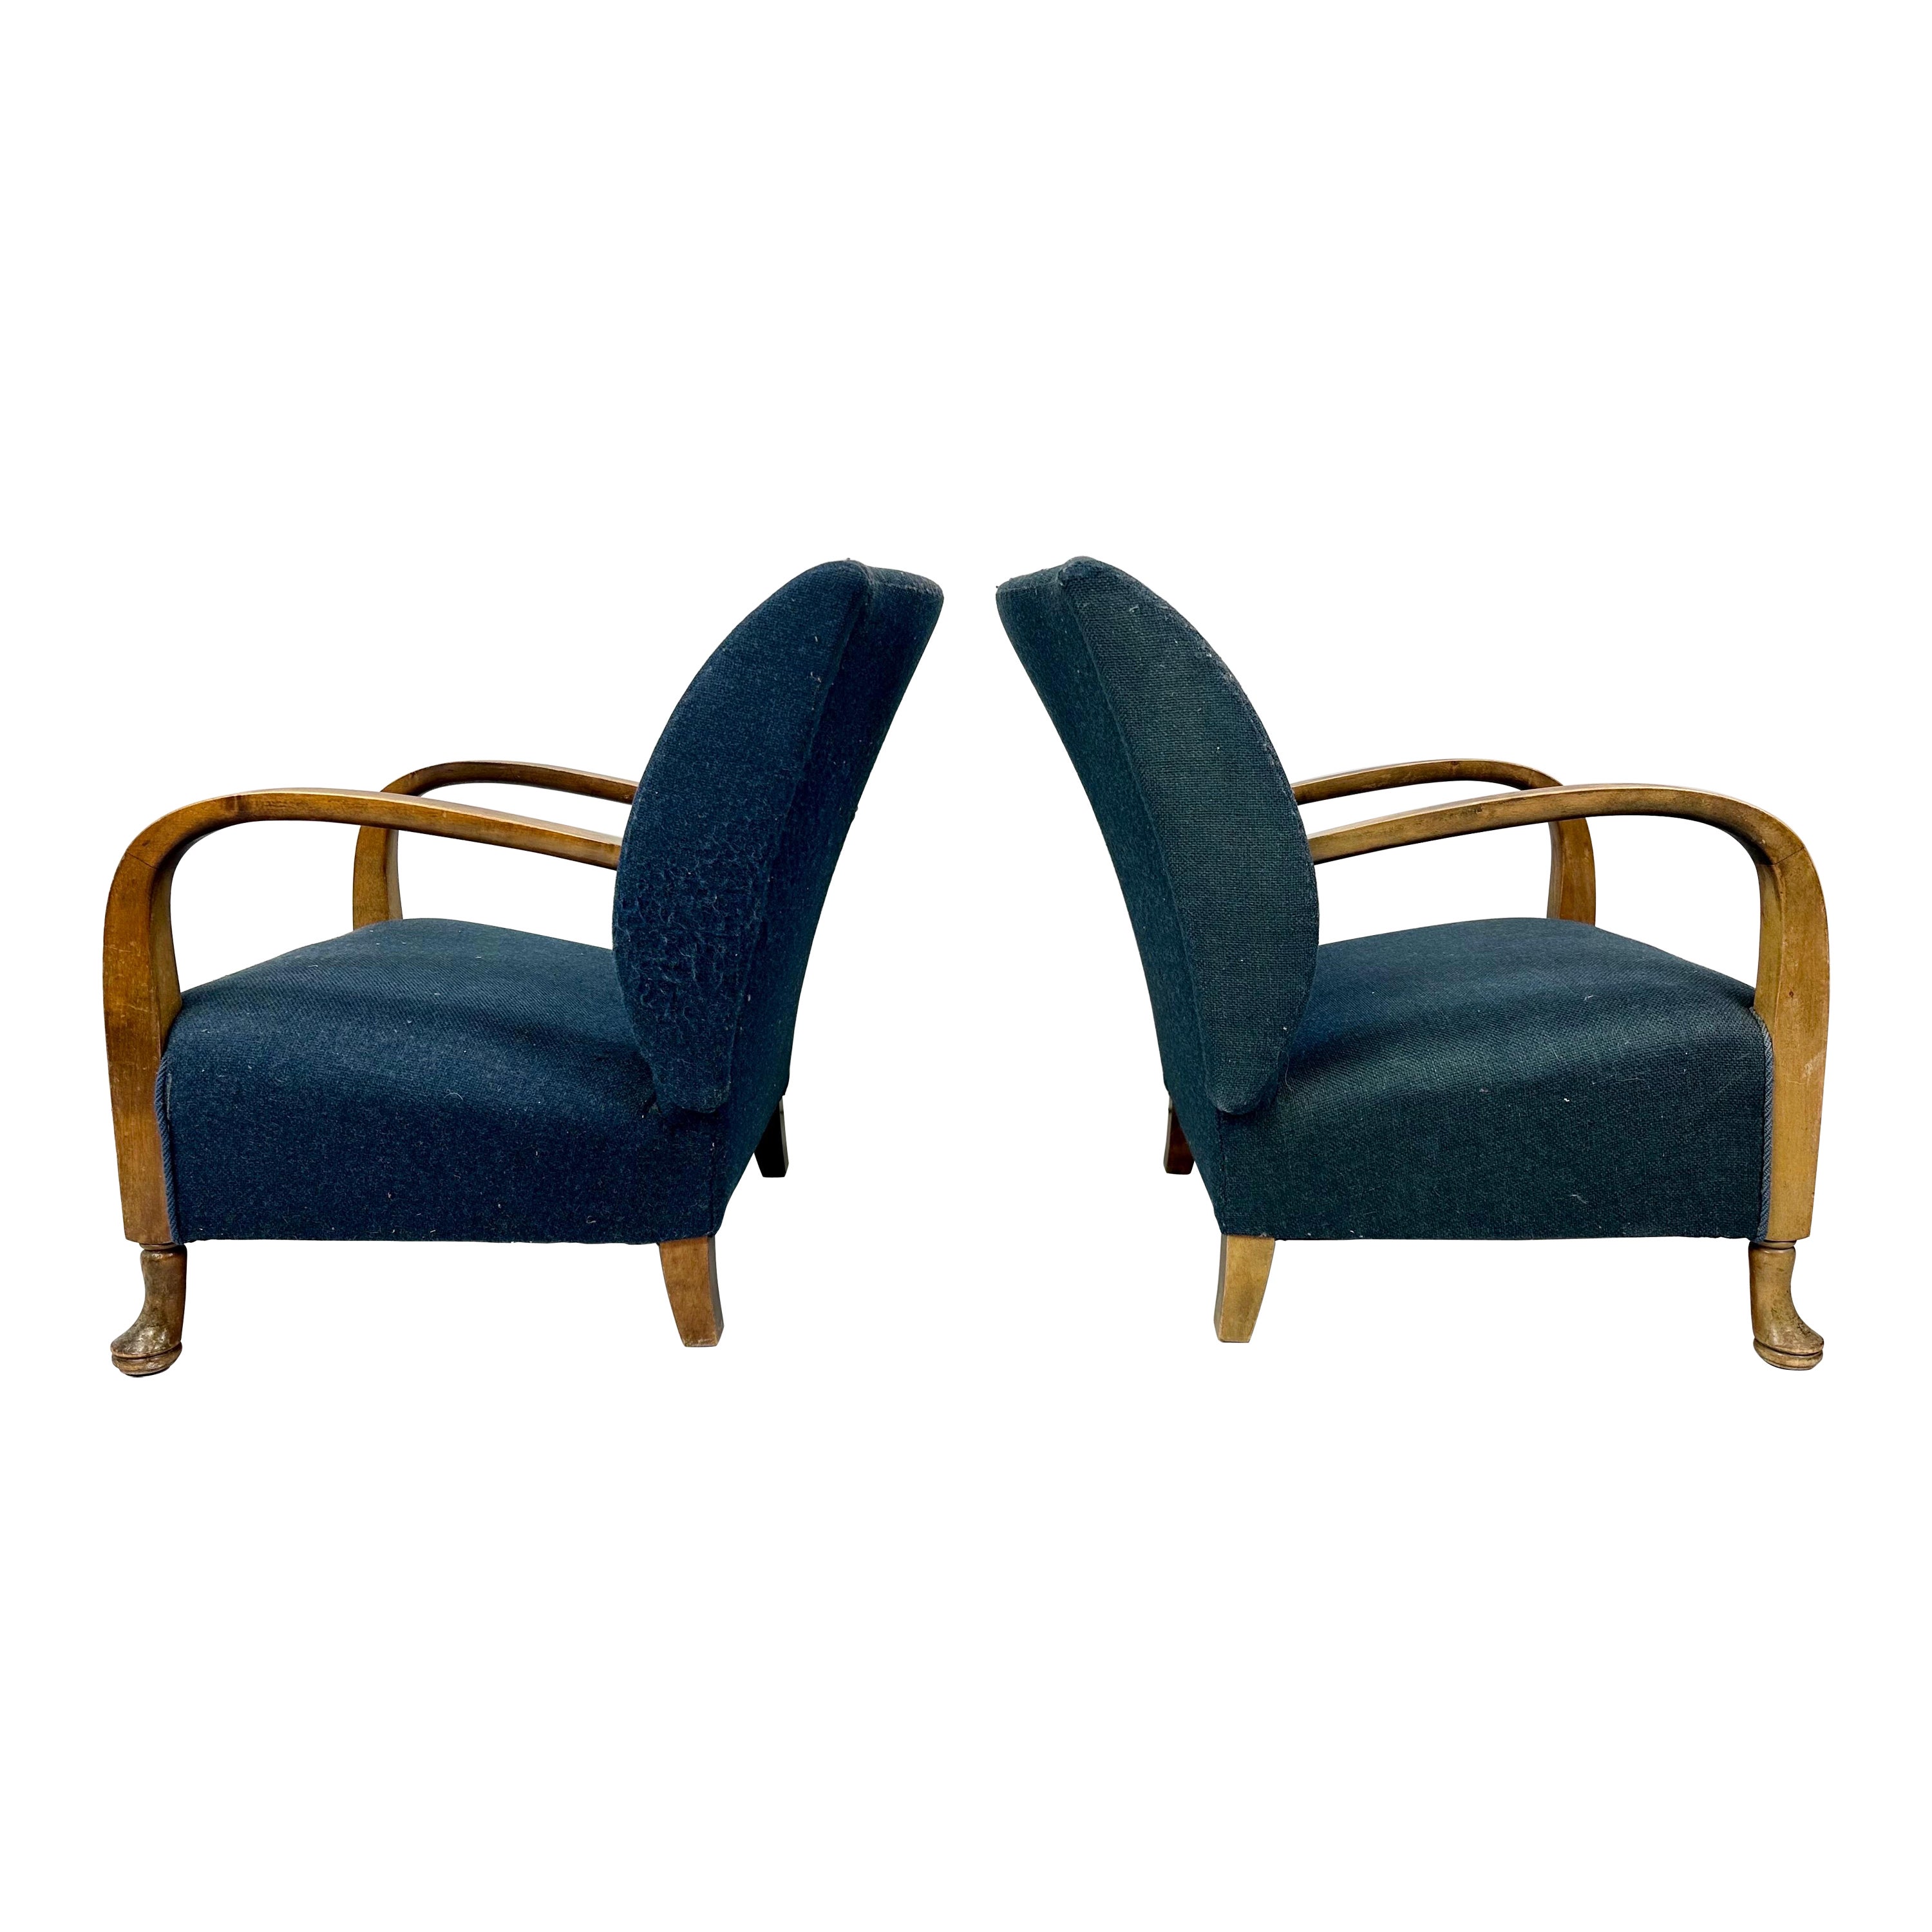 Pair of 1940’s Danish Lounge Chairs For Sale